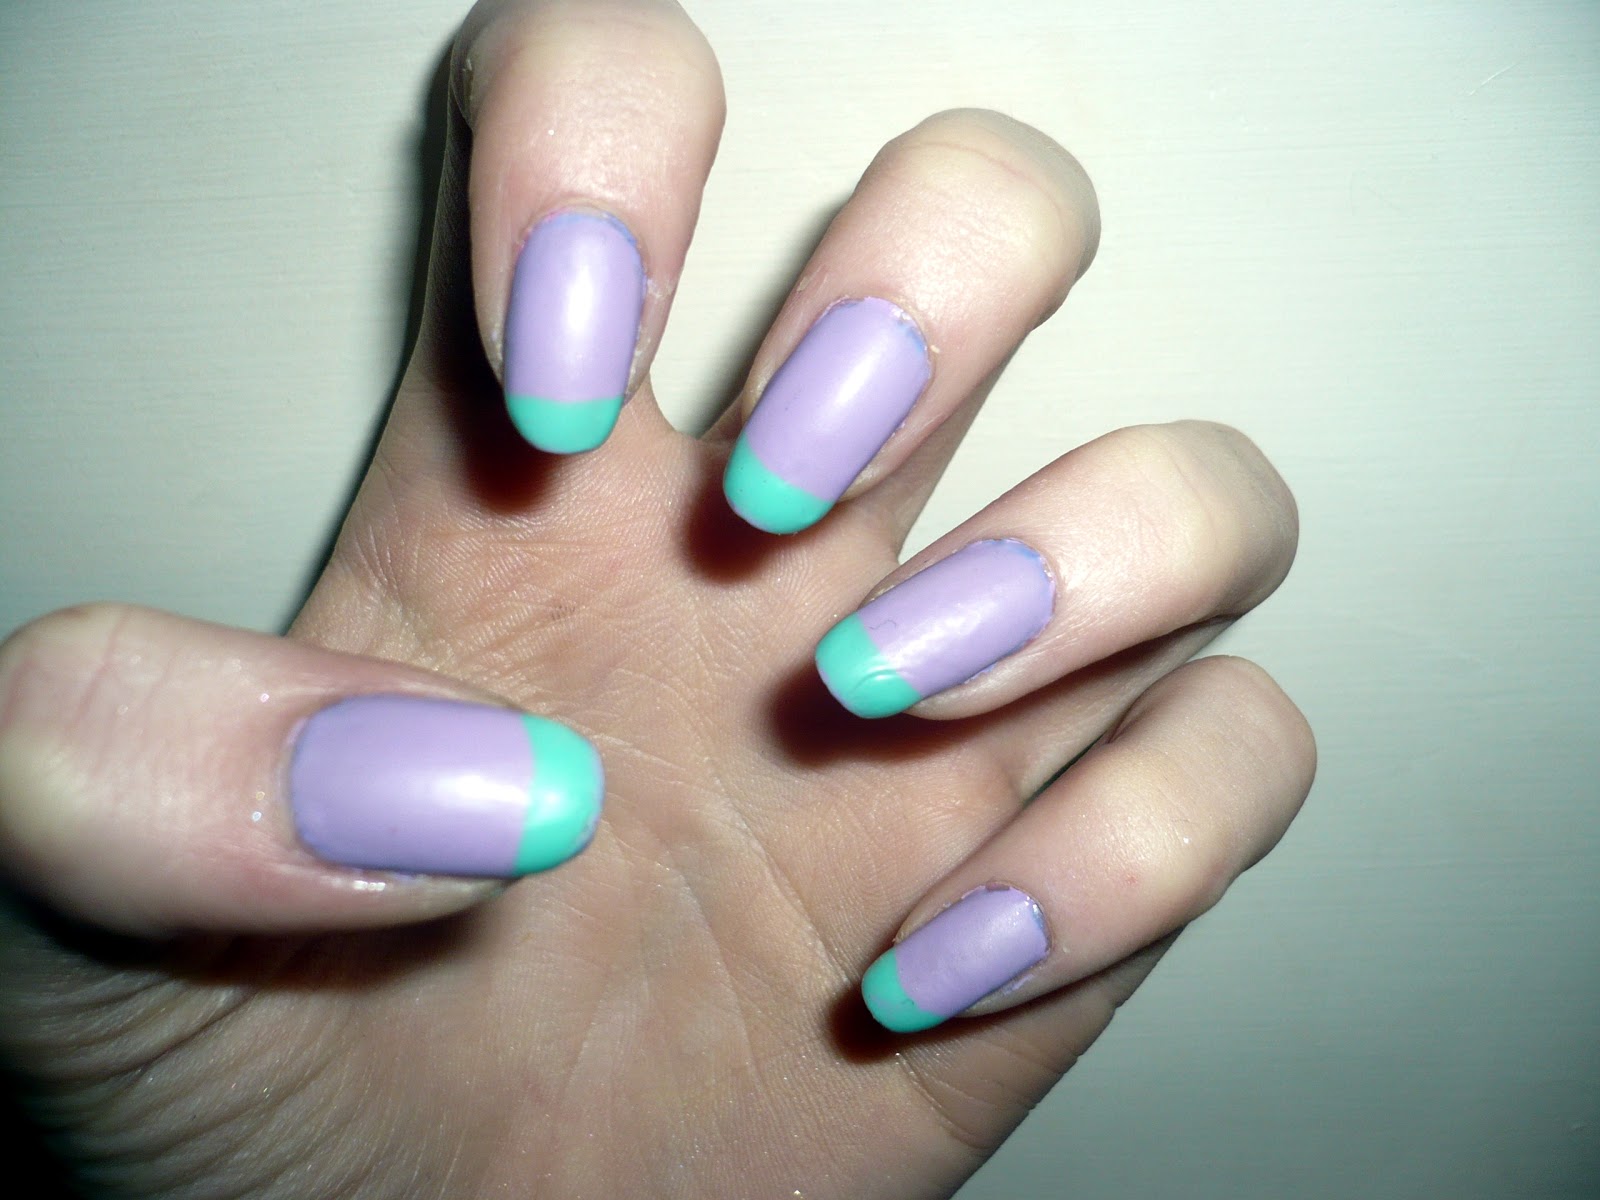 3. Pastel Nail Art Designs for a Soft and Feminine Look - wide 1